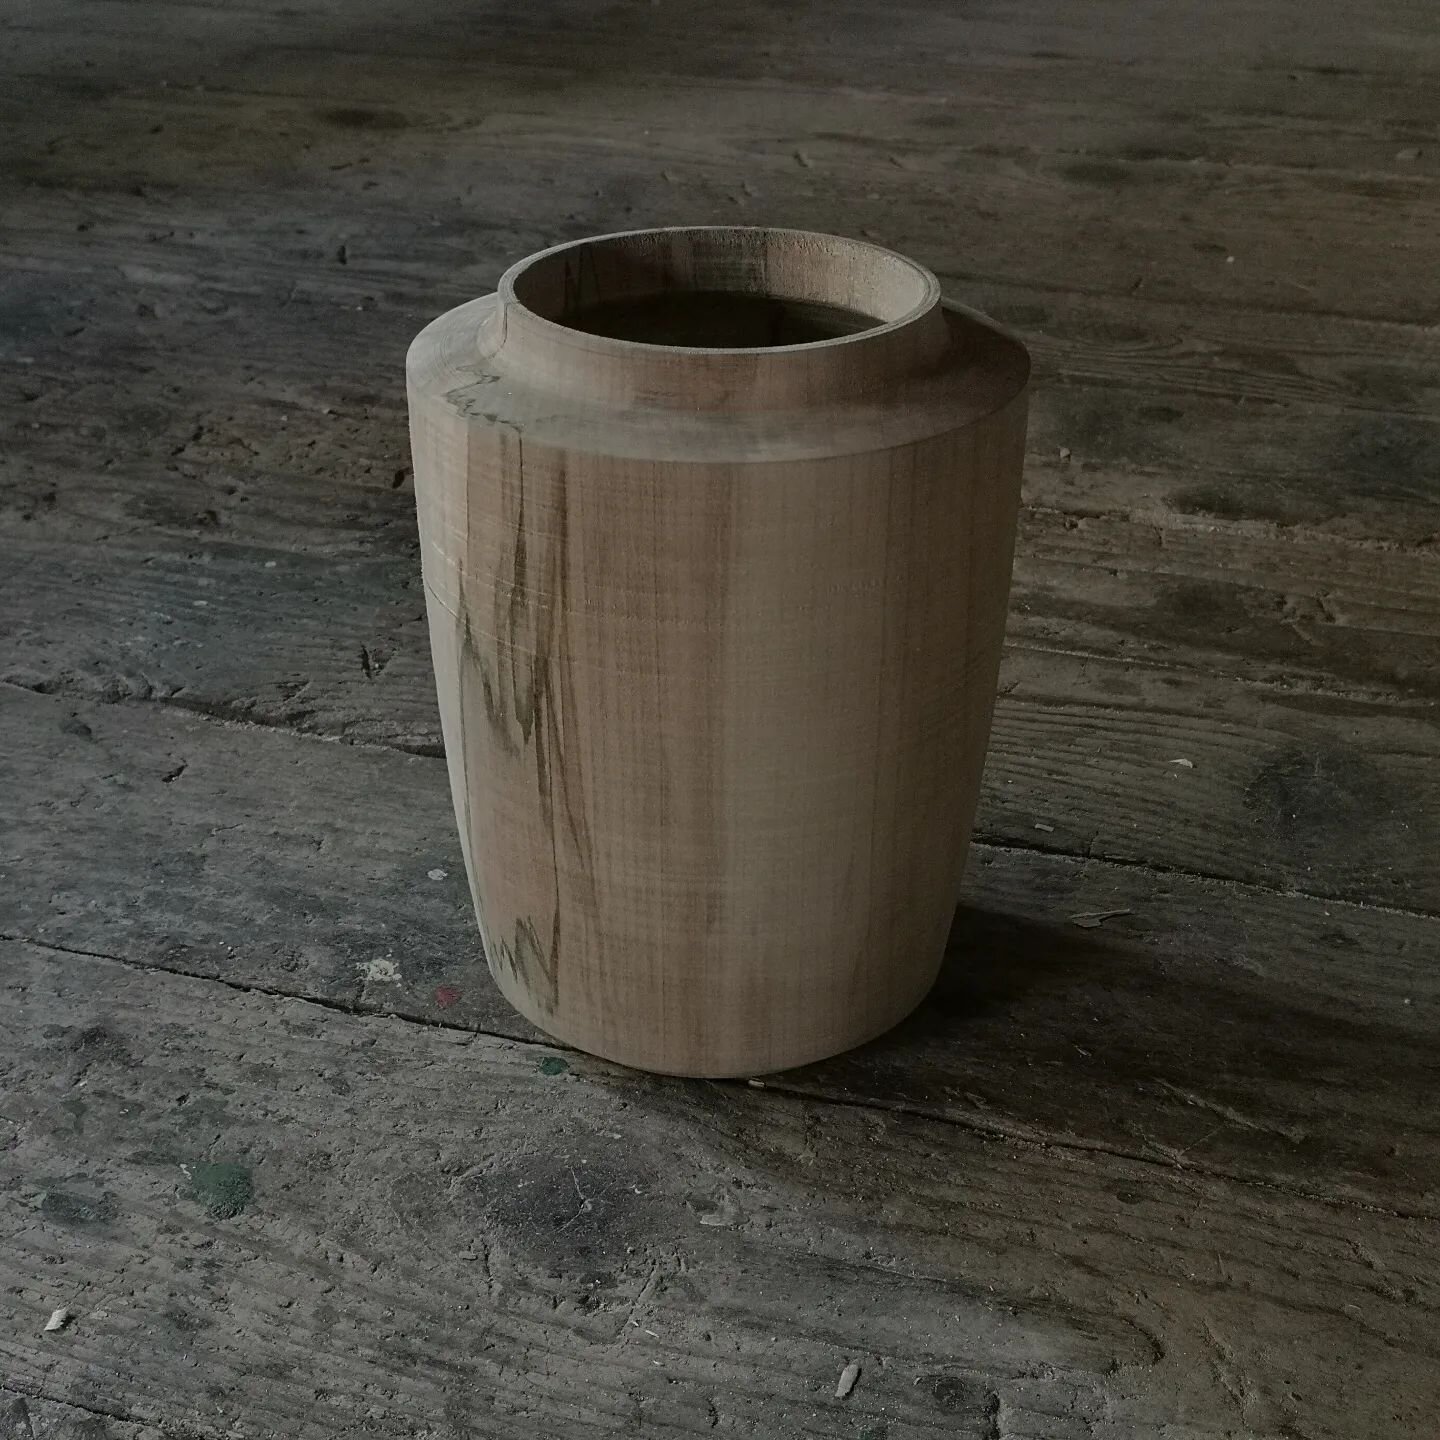 Lidded vessel in progress.

Pole lathe turned spalted sycamore.

175mm (D) x 240mm (H) 

Out of curiosity I weighed the sycamore before mounting it on the lathe. It was just shy of 7 kilos! It is by far the largest end grain vessel I've attempted so 